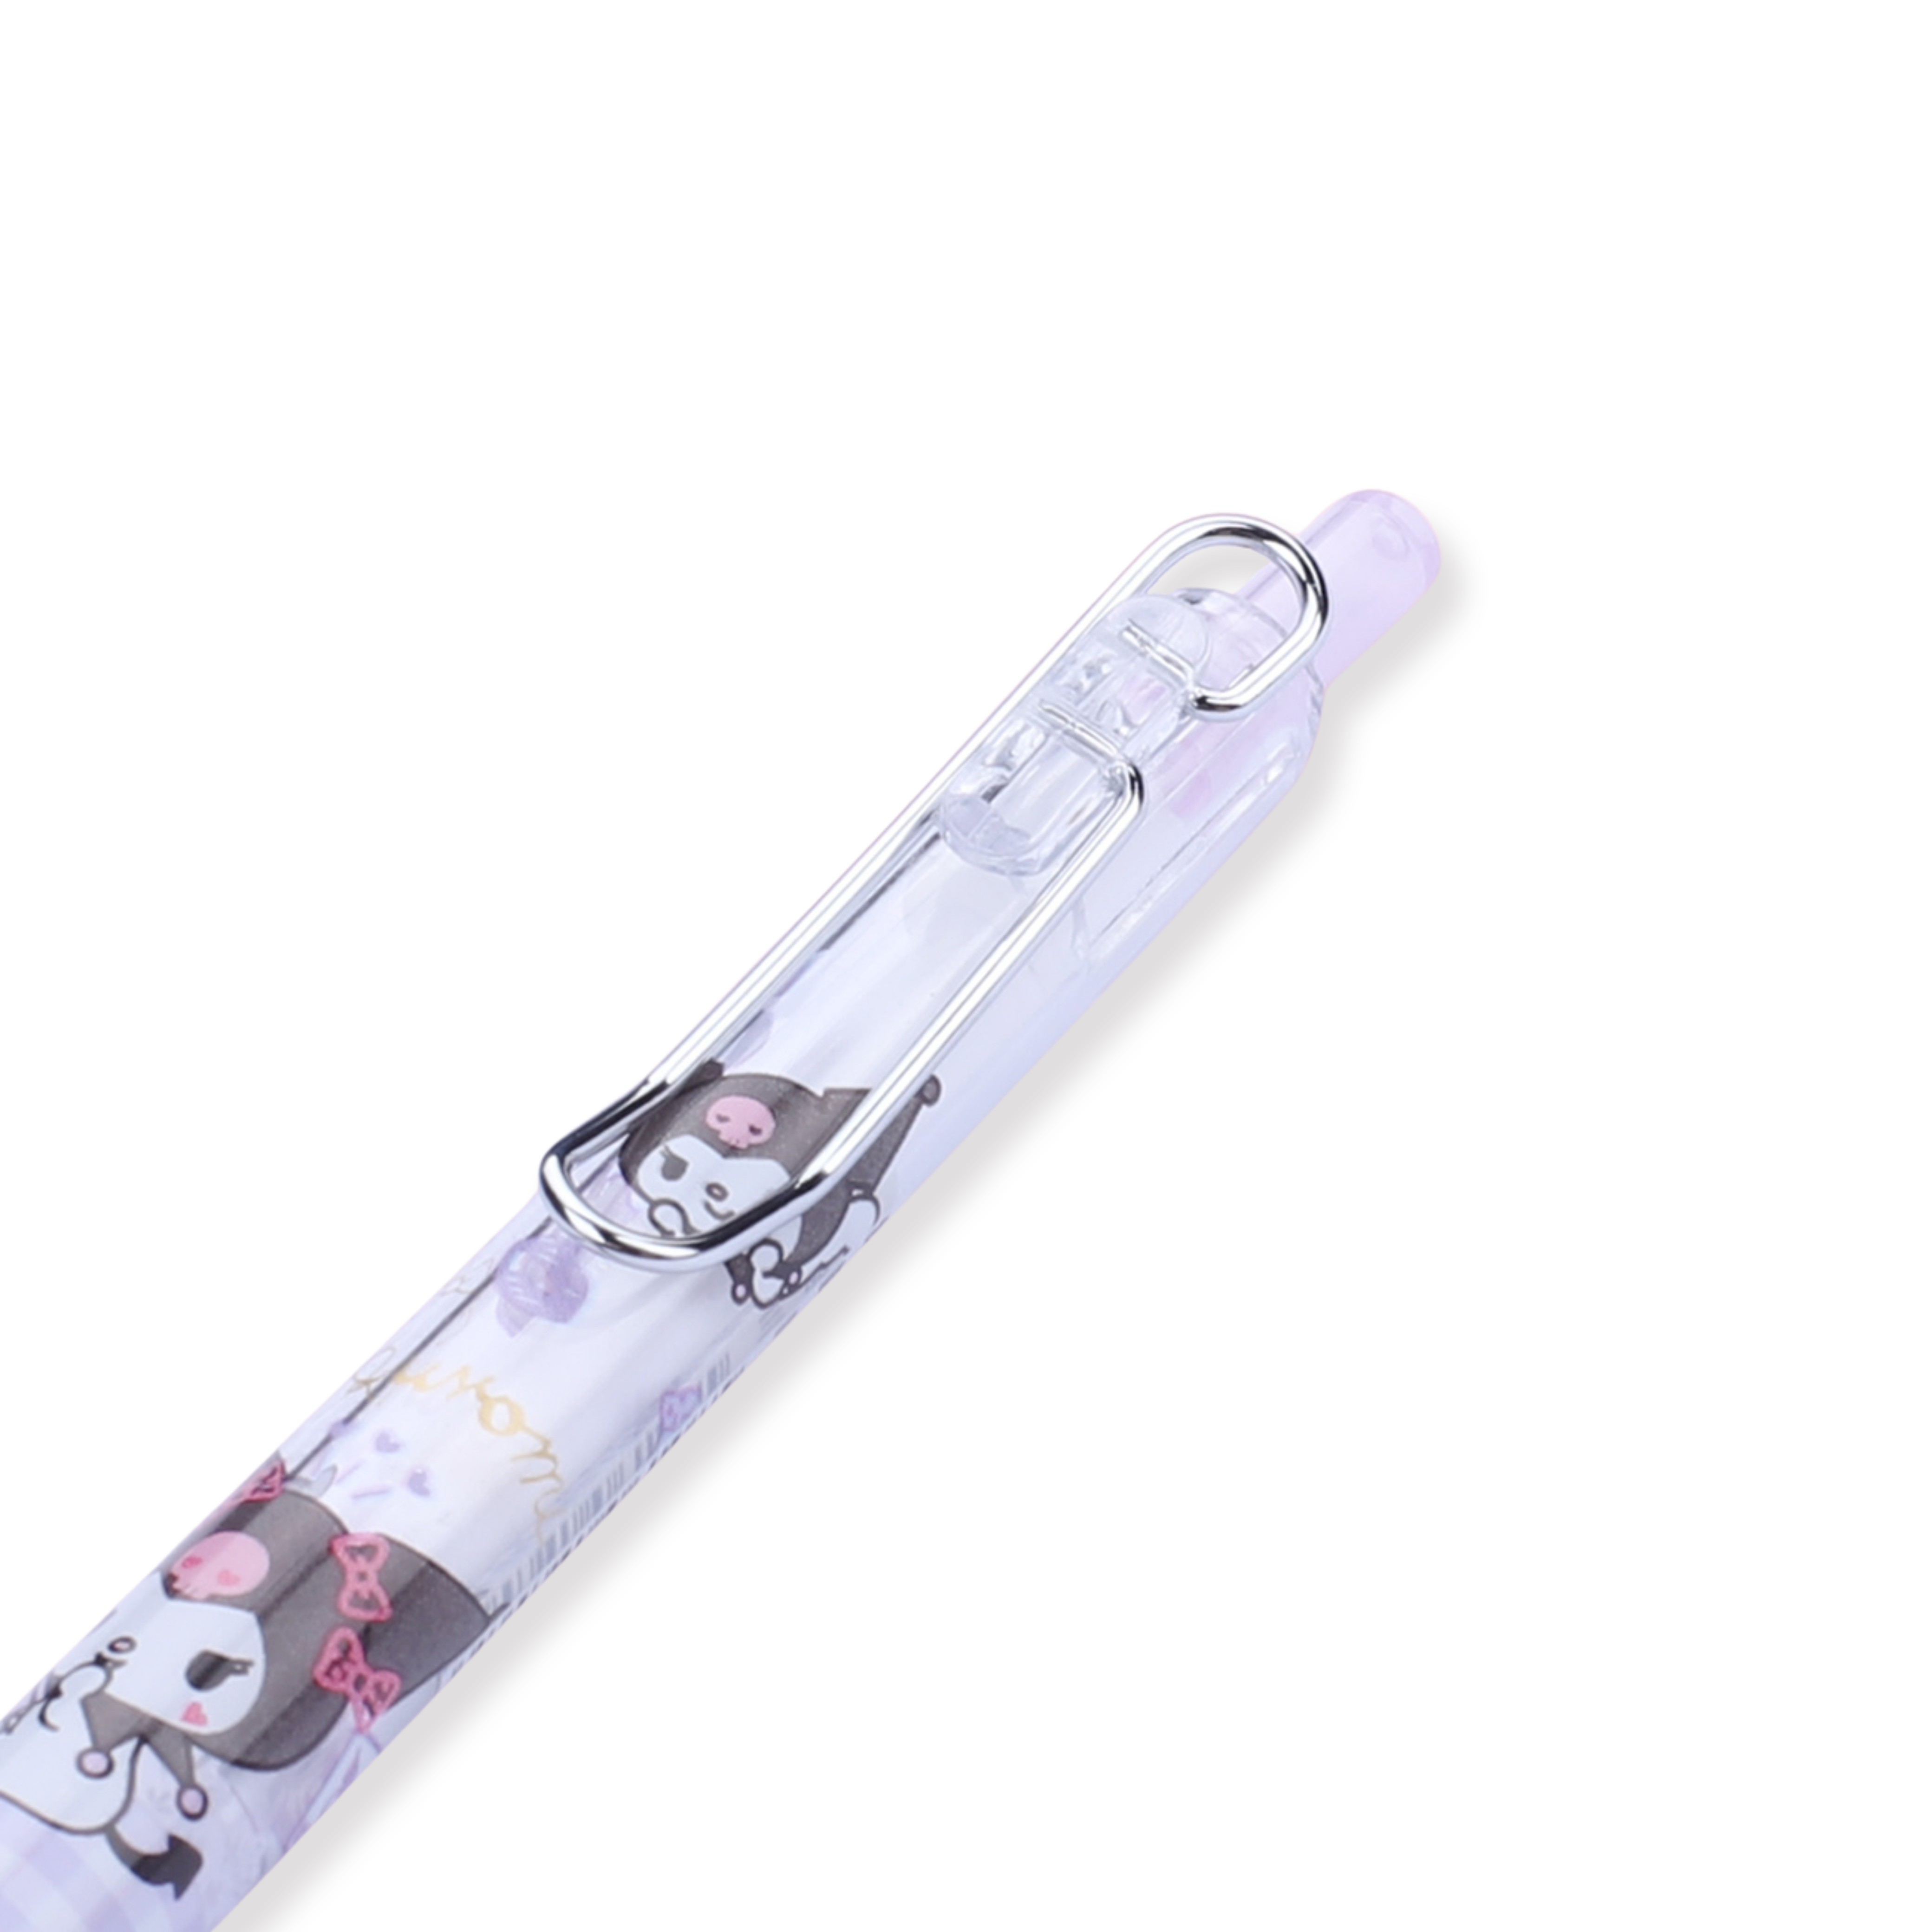 Sanrio Family Series Gel Pen With Metal Clip Blind Box - Black Ink - 0.5 mm - Stationery Pal